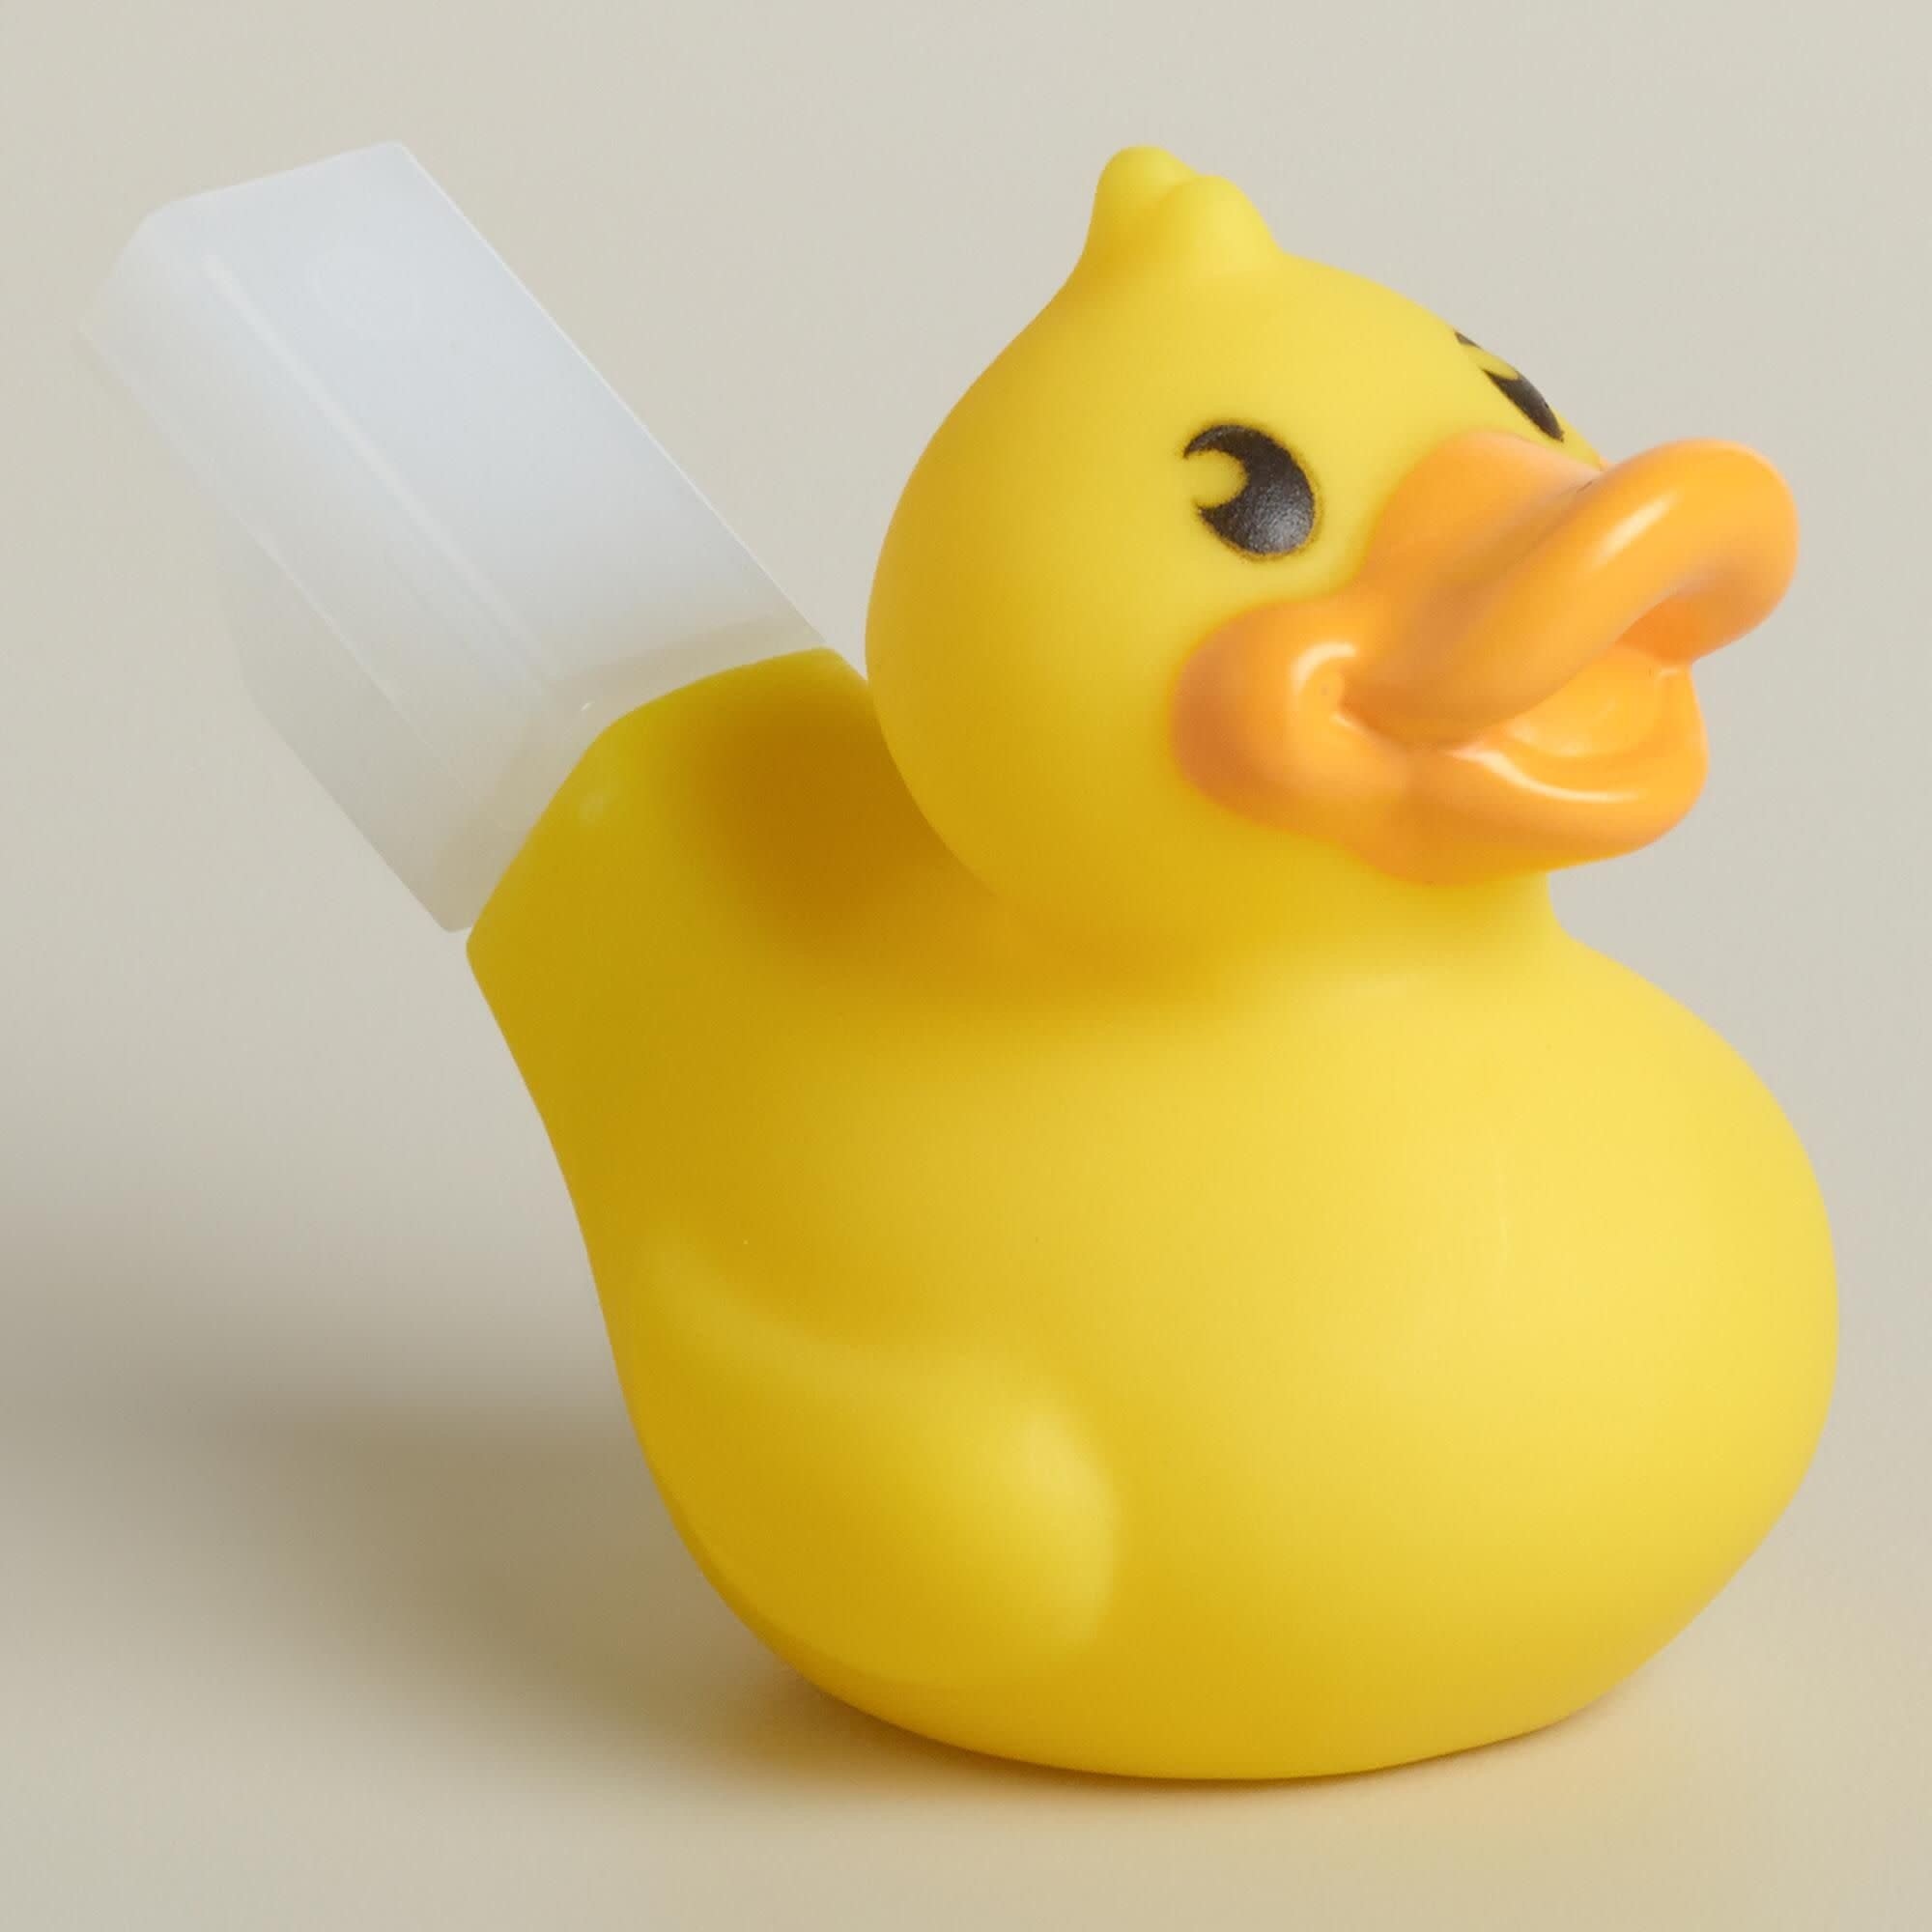 duck whistle toy